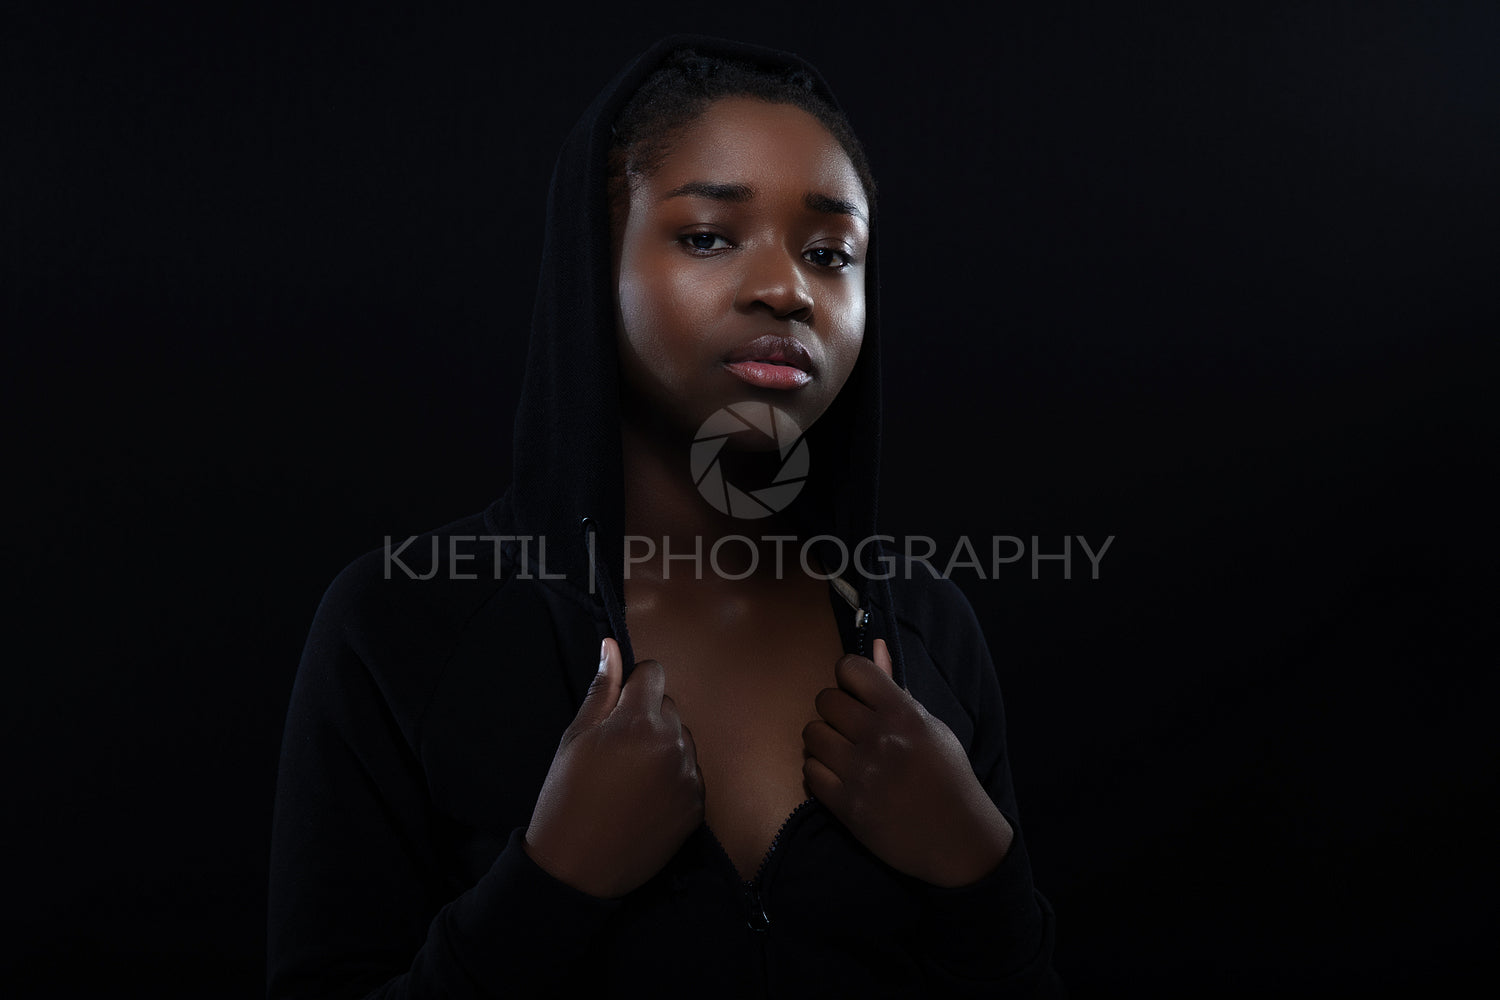 Confident woman with dark skin and cool attitude wearing hoodie